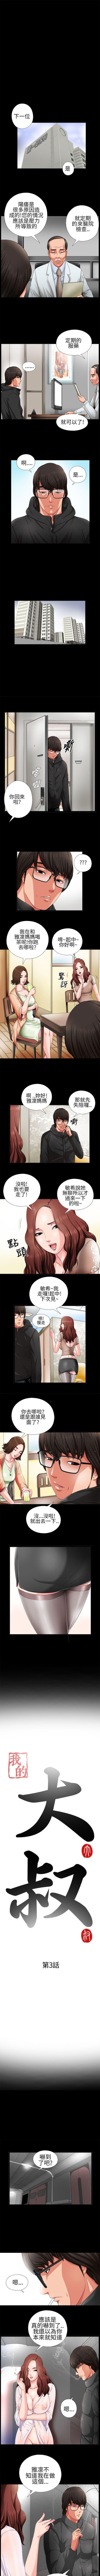 Home 我的大叔 1-127 Pack - Page 11